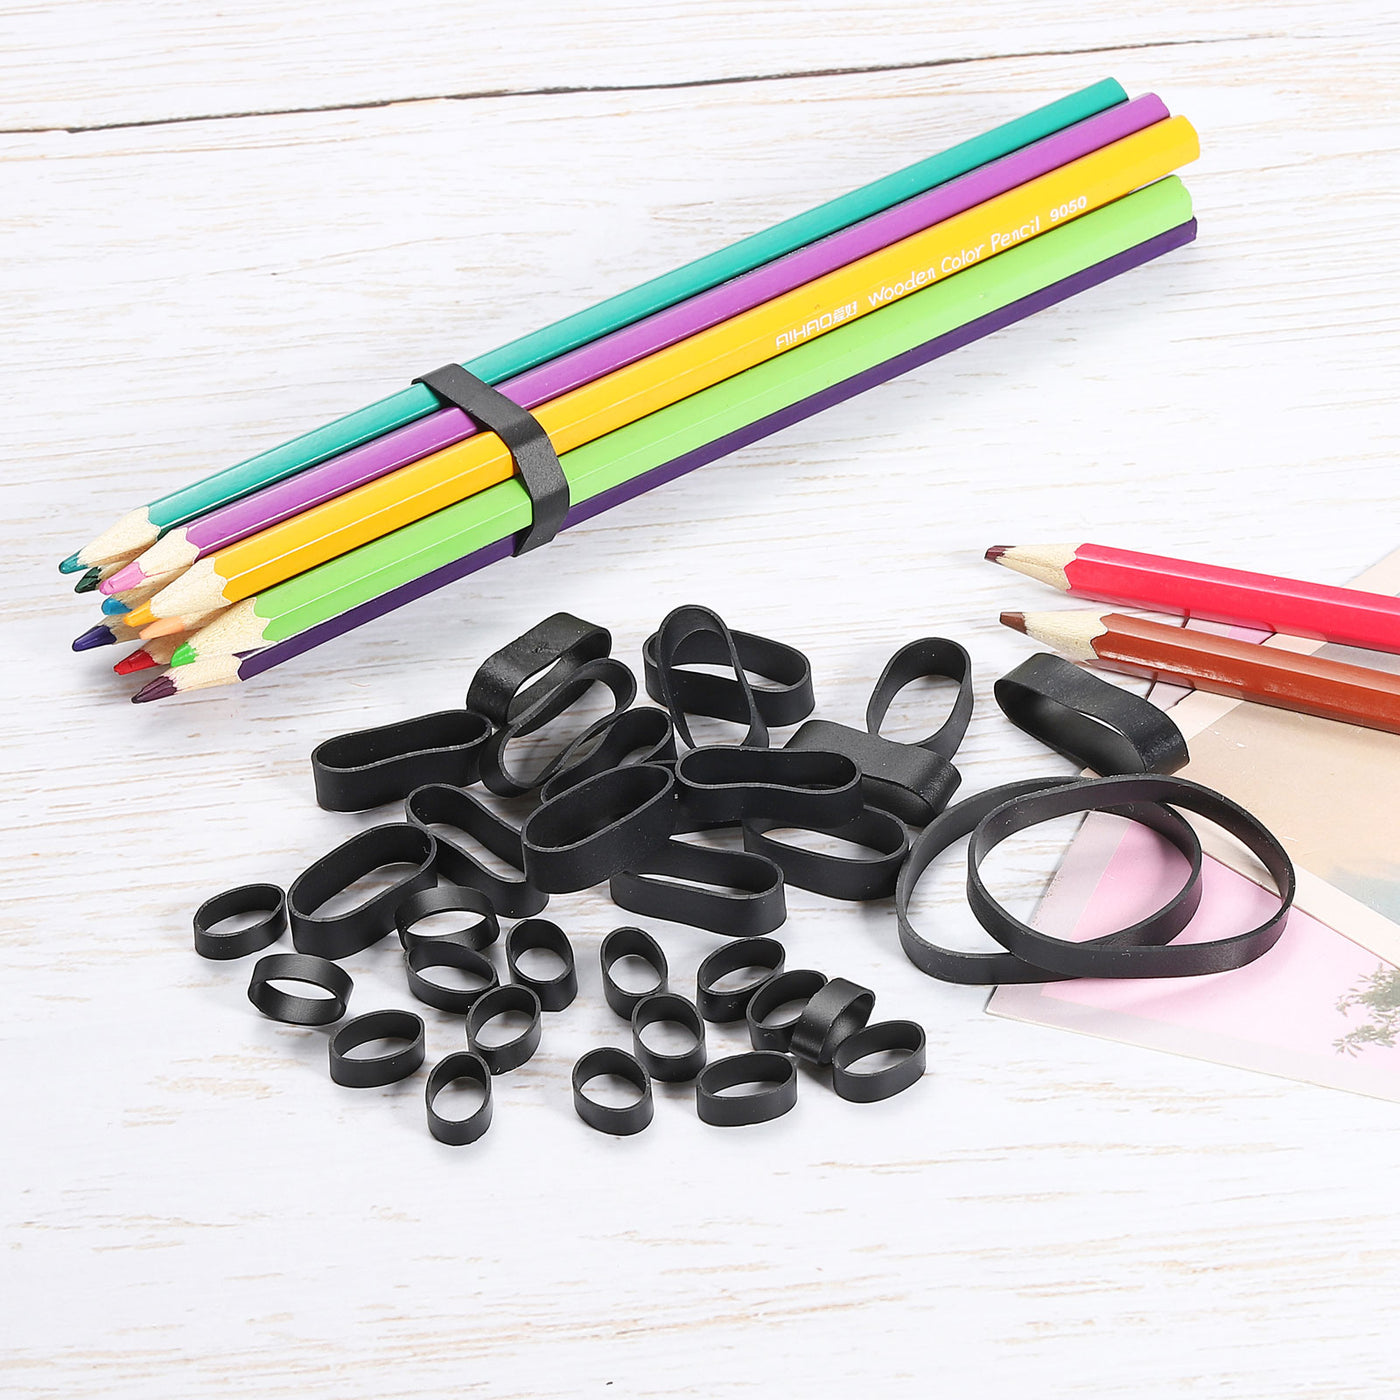 Harfington Silicone Rubber Bands Rings 100pcs Non-slip 3/8" Flat Black for Books, Art, Boxes, Cord Wrapping, Bag Wraps